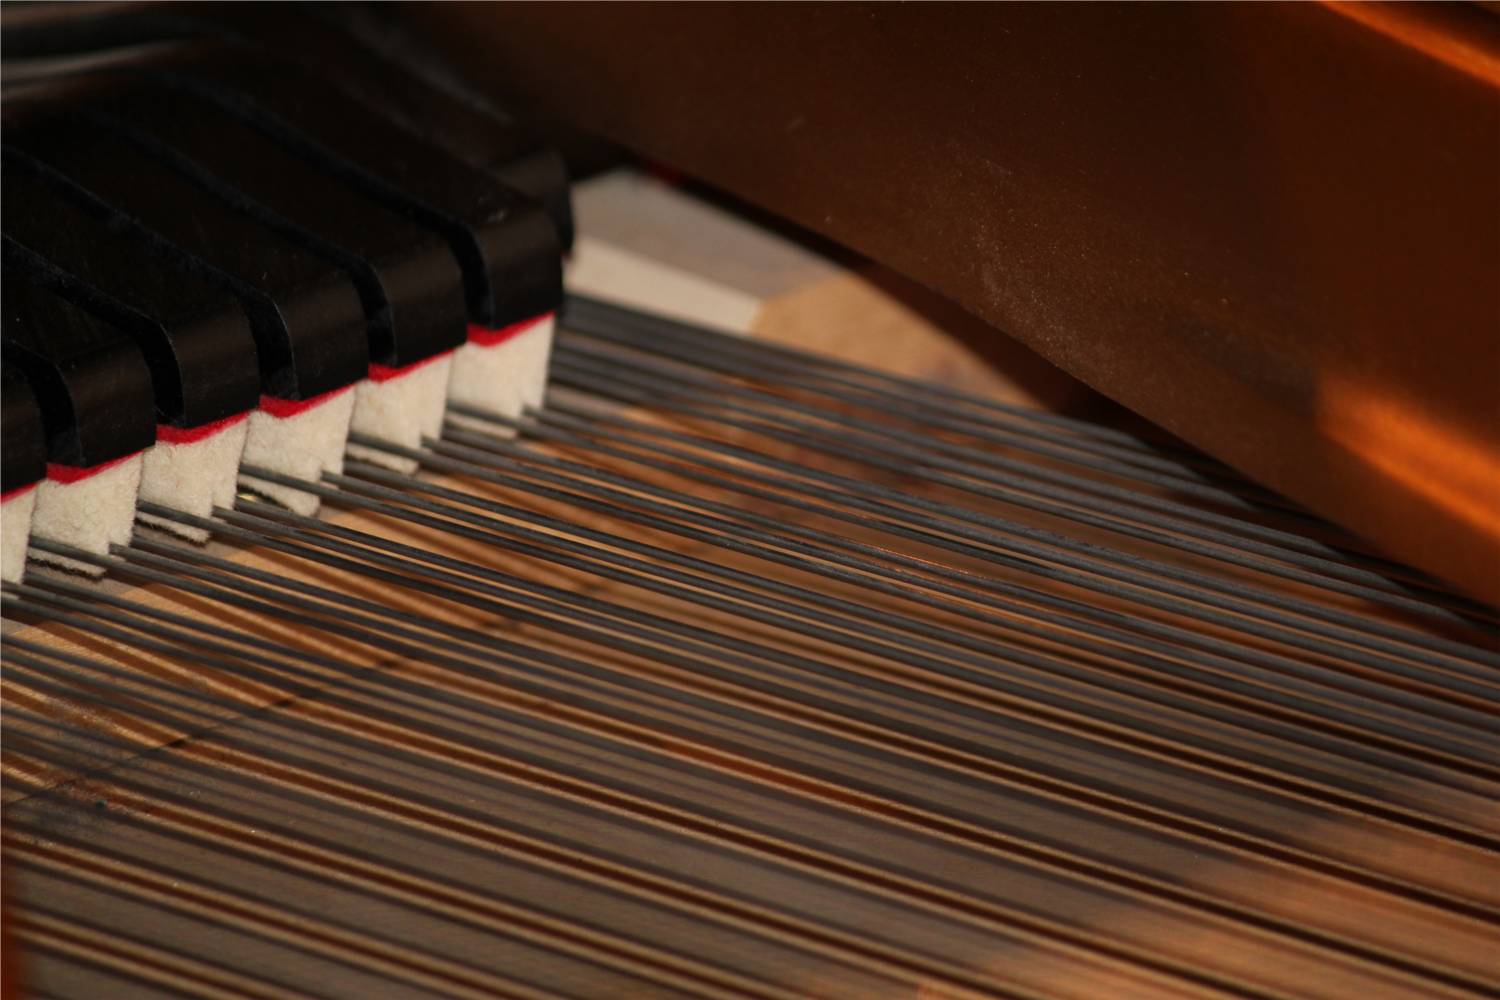 The dampers and higher strings of one of the studio's pianos.